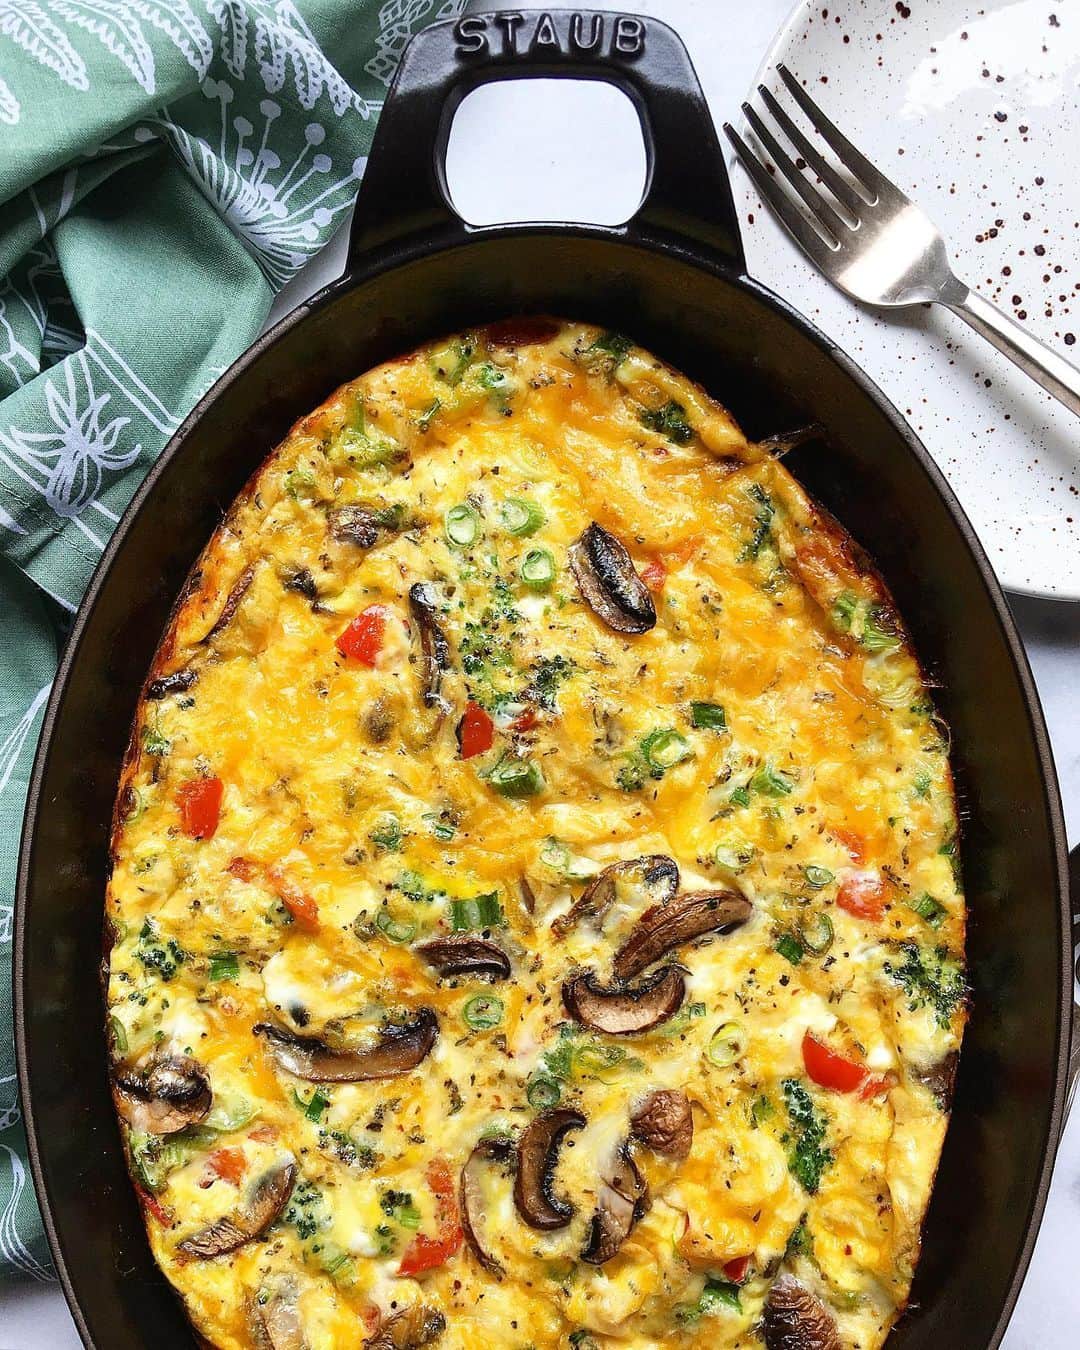 Staub USA（ストウブ）のインスタグラム：「@supperwithmichelle loves to bake a vegetable frittata on the weekend. It's a versatile meal-prep staple that is satisfying at any time of day, and it's totally stunning when baked in one of our cast iron baking dishes. Get the recipe by visiting @supperwithmichelle's site and searching "baked vegetable frittata," and shop the pan by visiting the link in our bio and searching "cast iron oven dish." #madeinStaub」